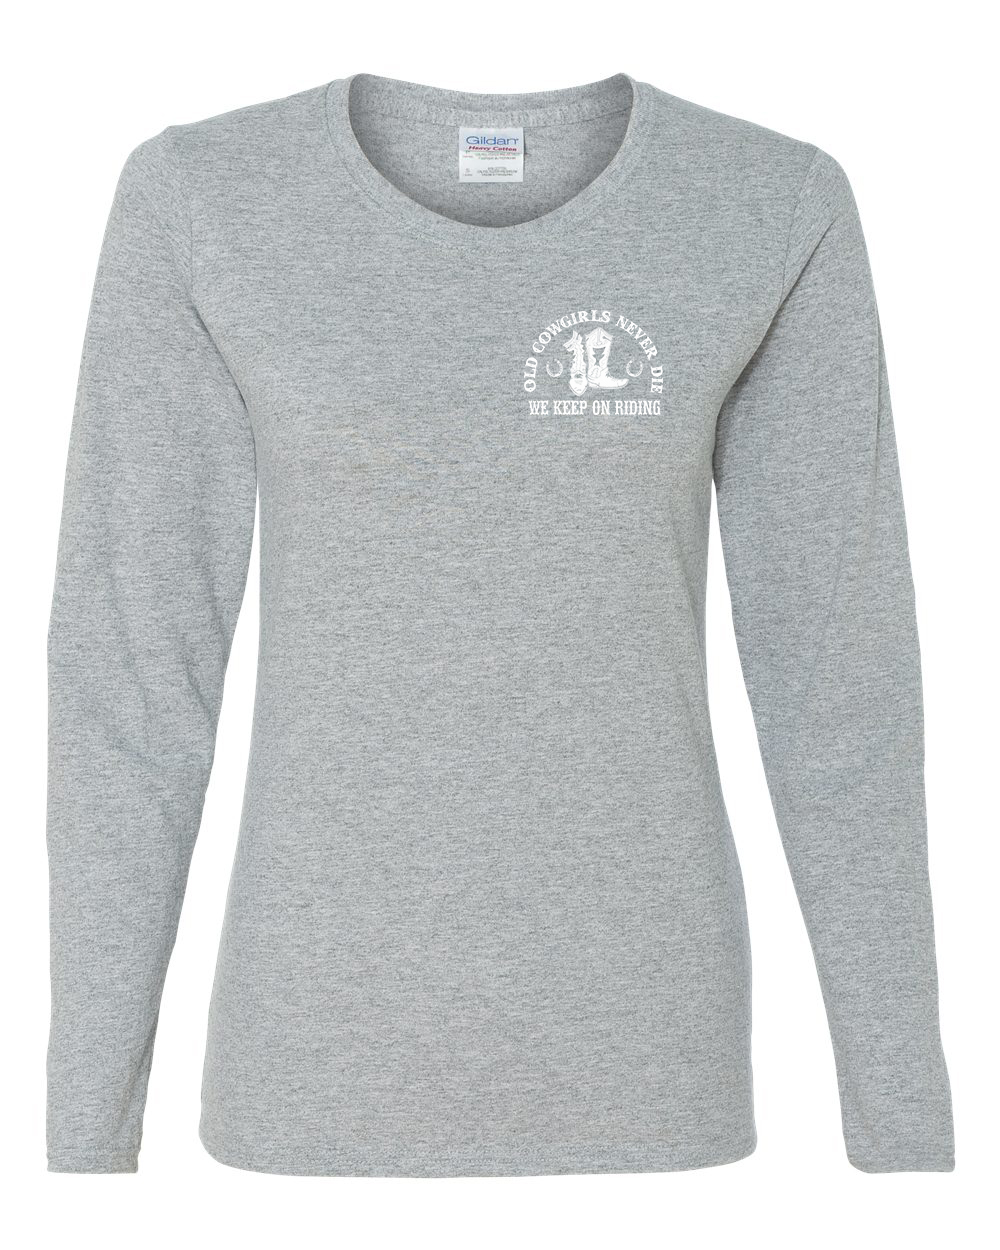 A long sleeve t-shirt with the words " state of mind ".